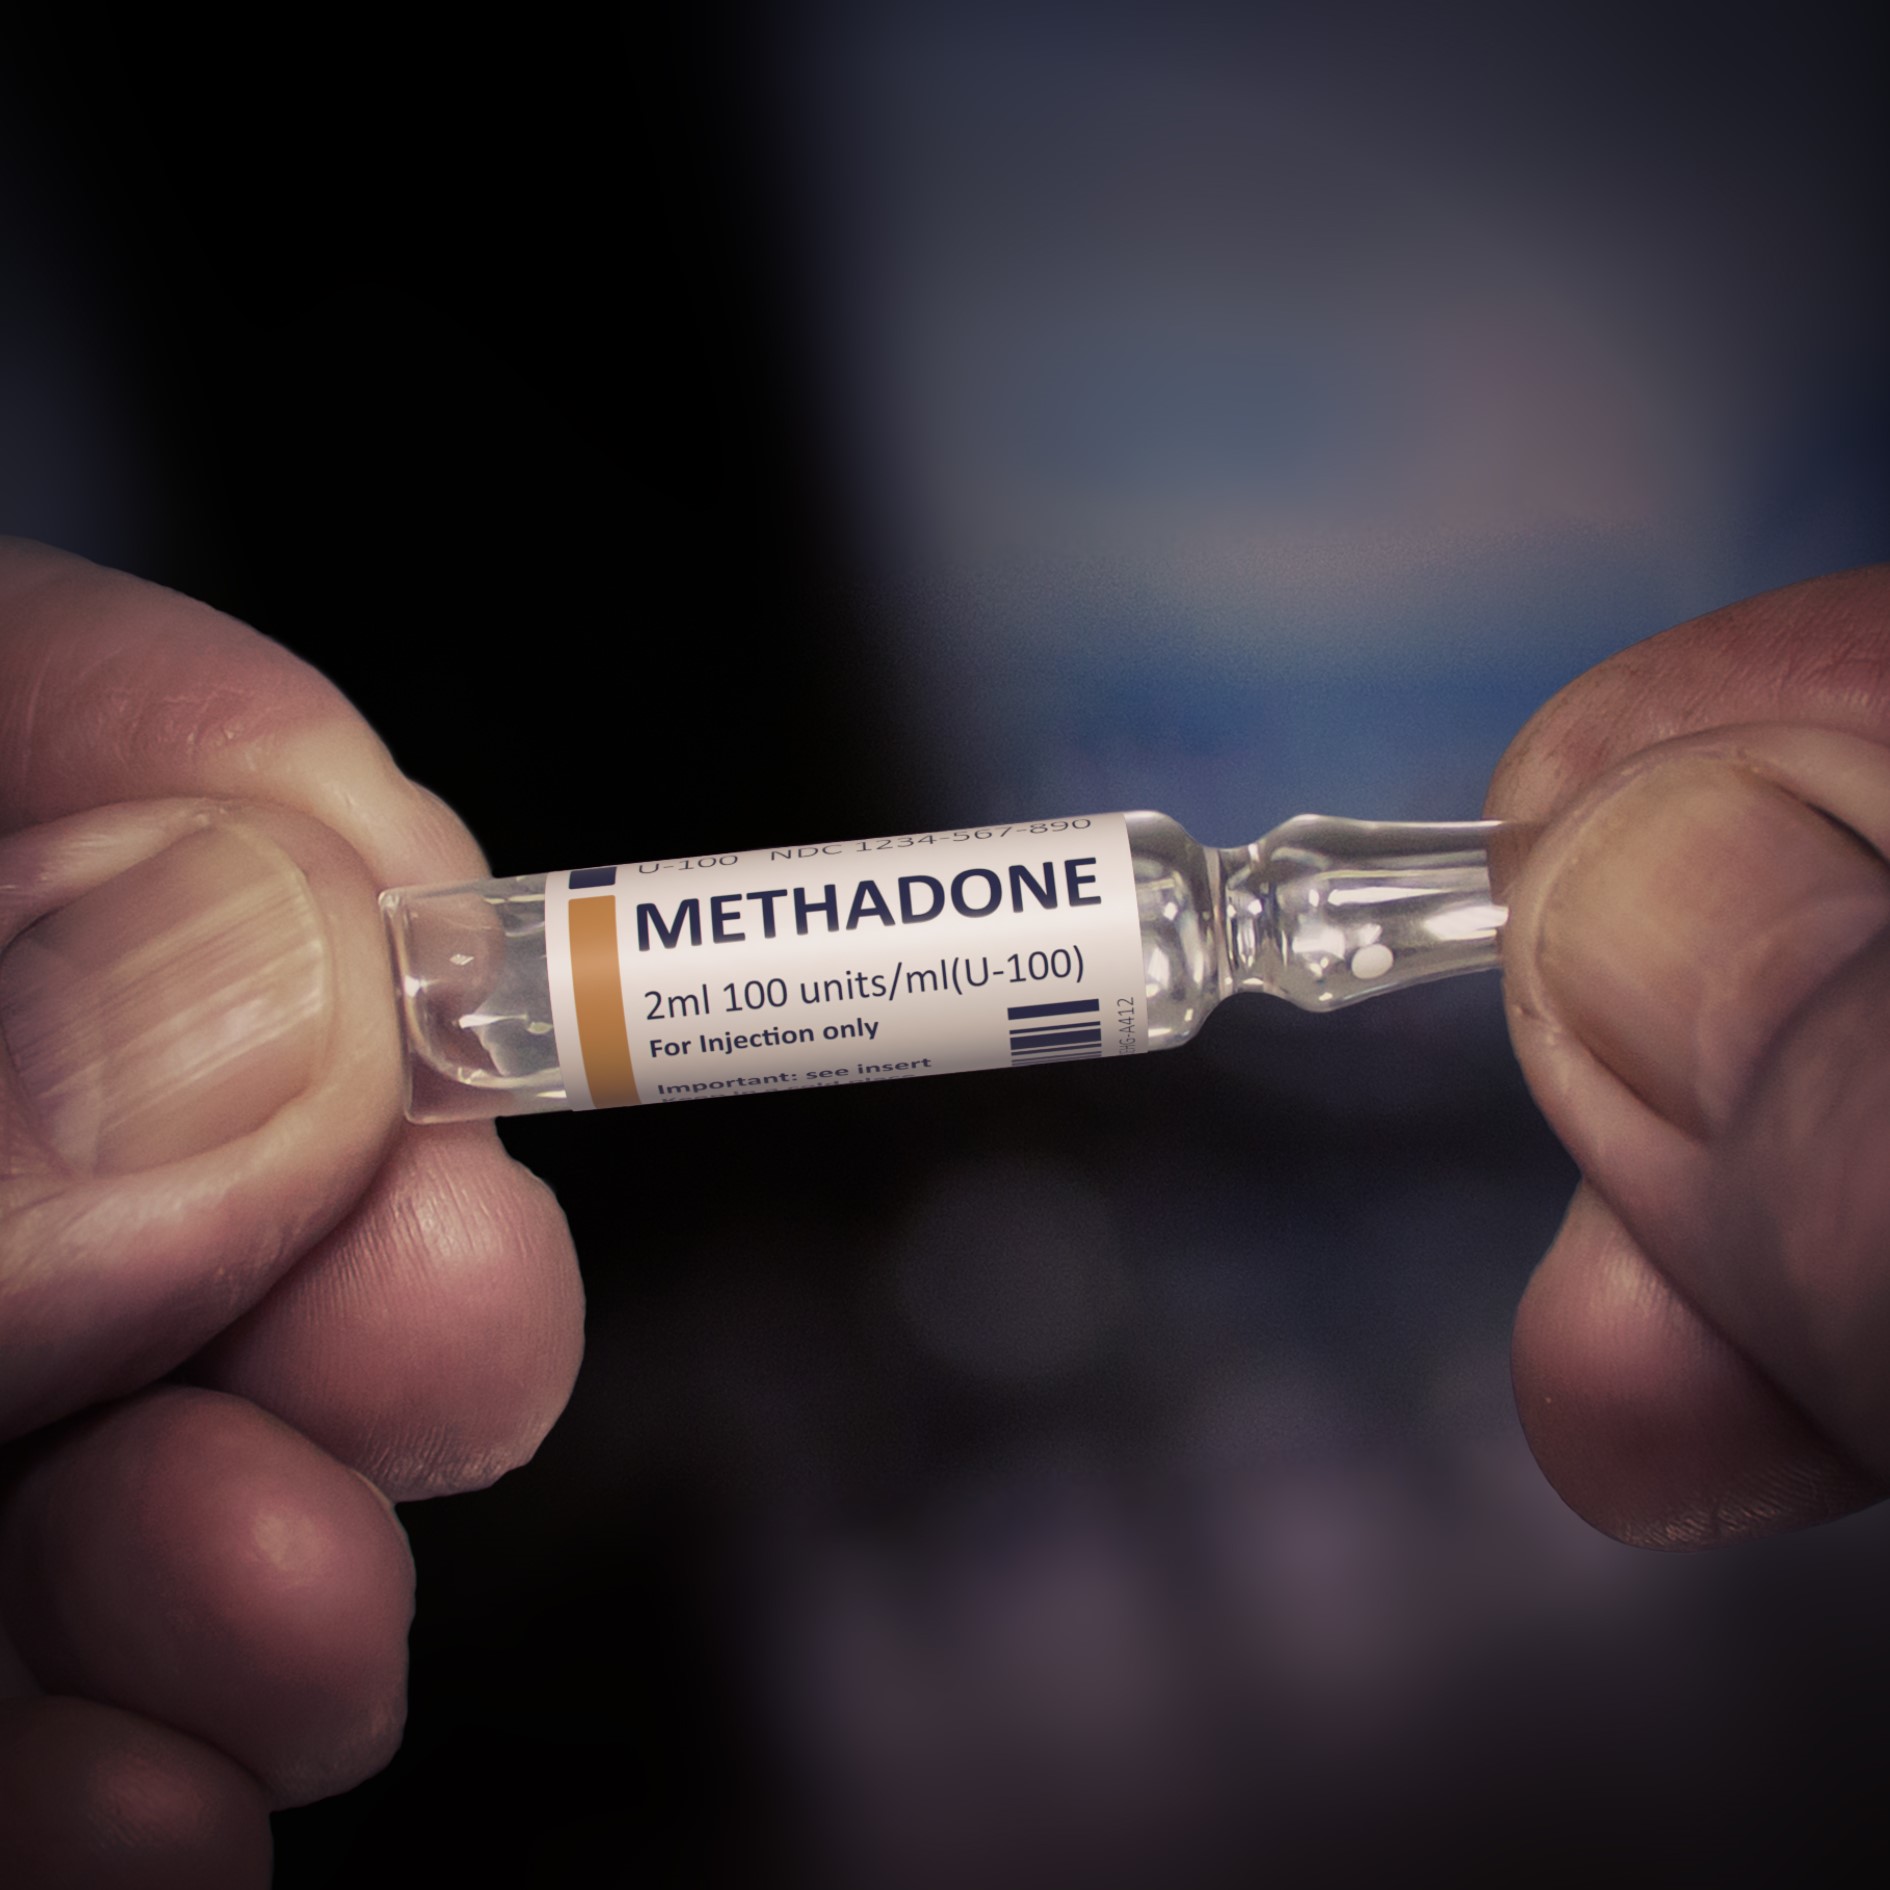 SAMHSA reduces barriers to new methadone patients in jail through crisis exceptions during the COVID-19 pandemic